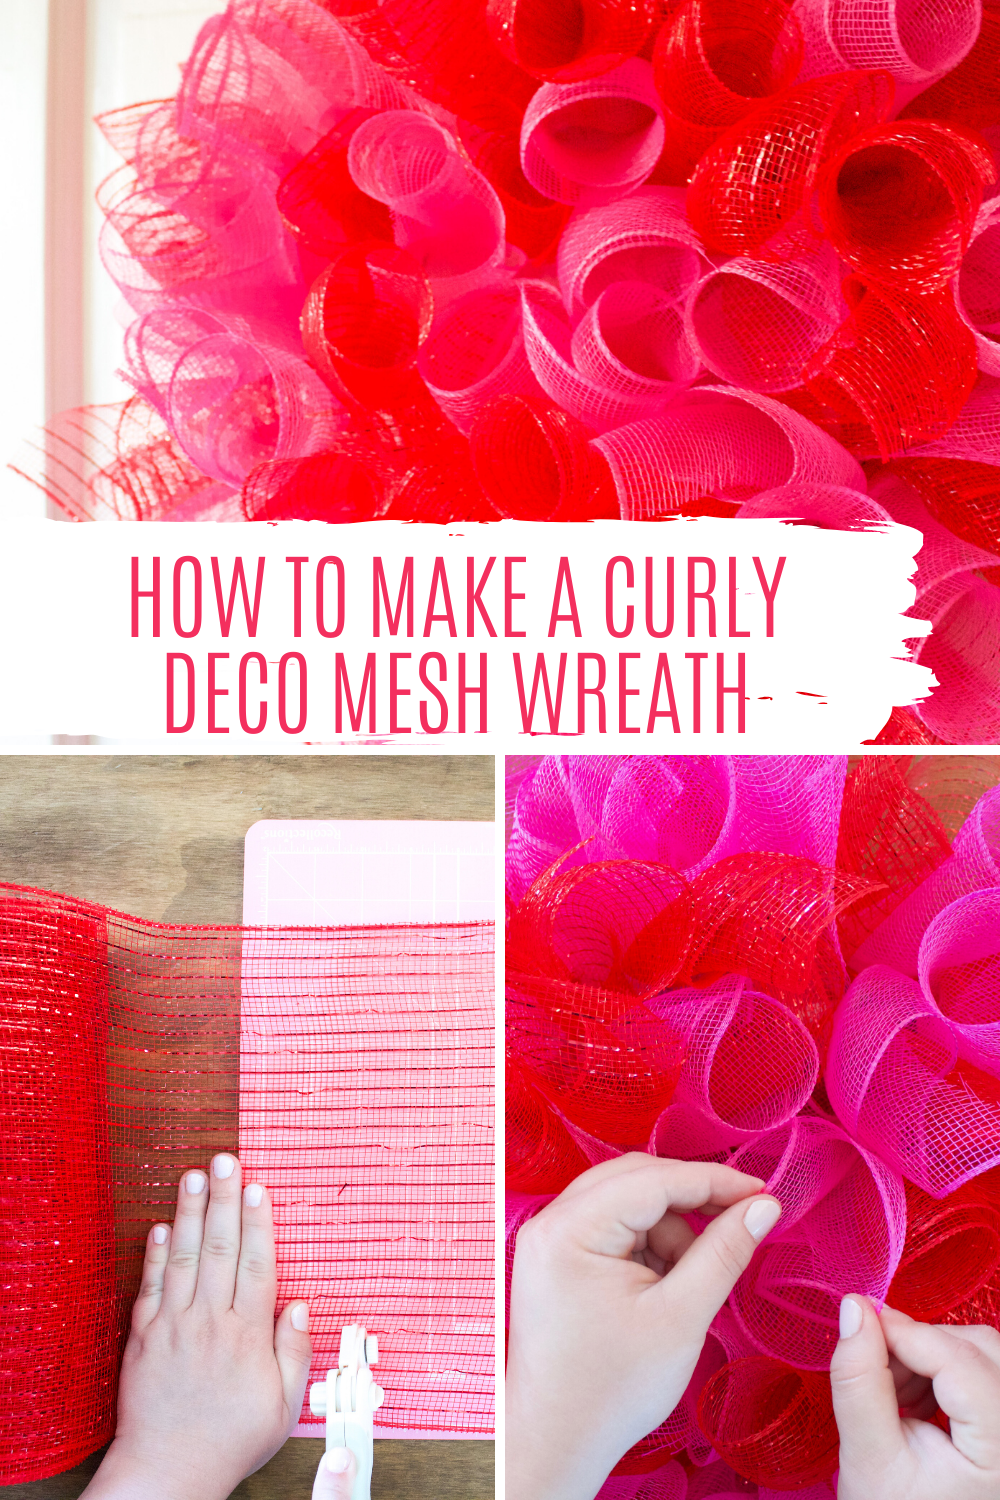 How to make a curly deco mesh wreath